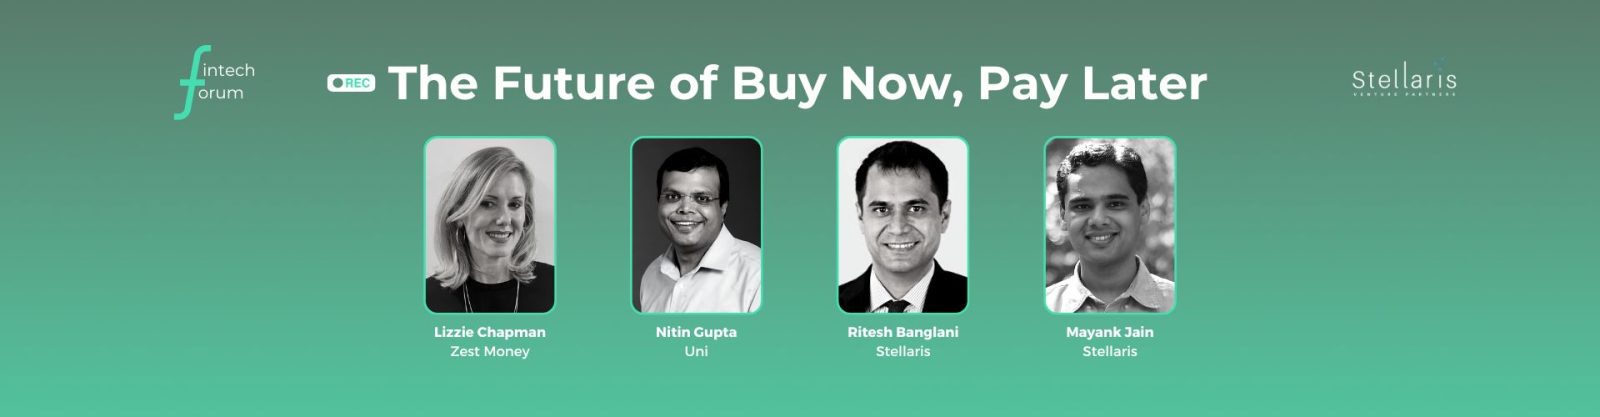 Fintech Forum #1: The Future of Buy Now, Pay Later (BNPL)